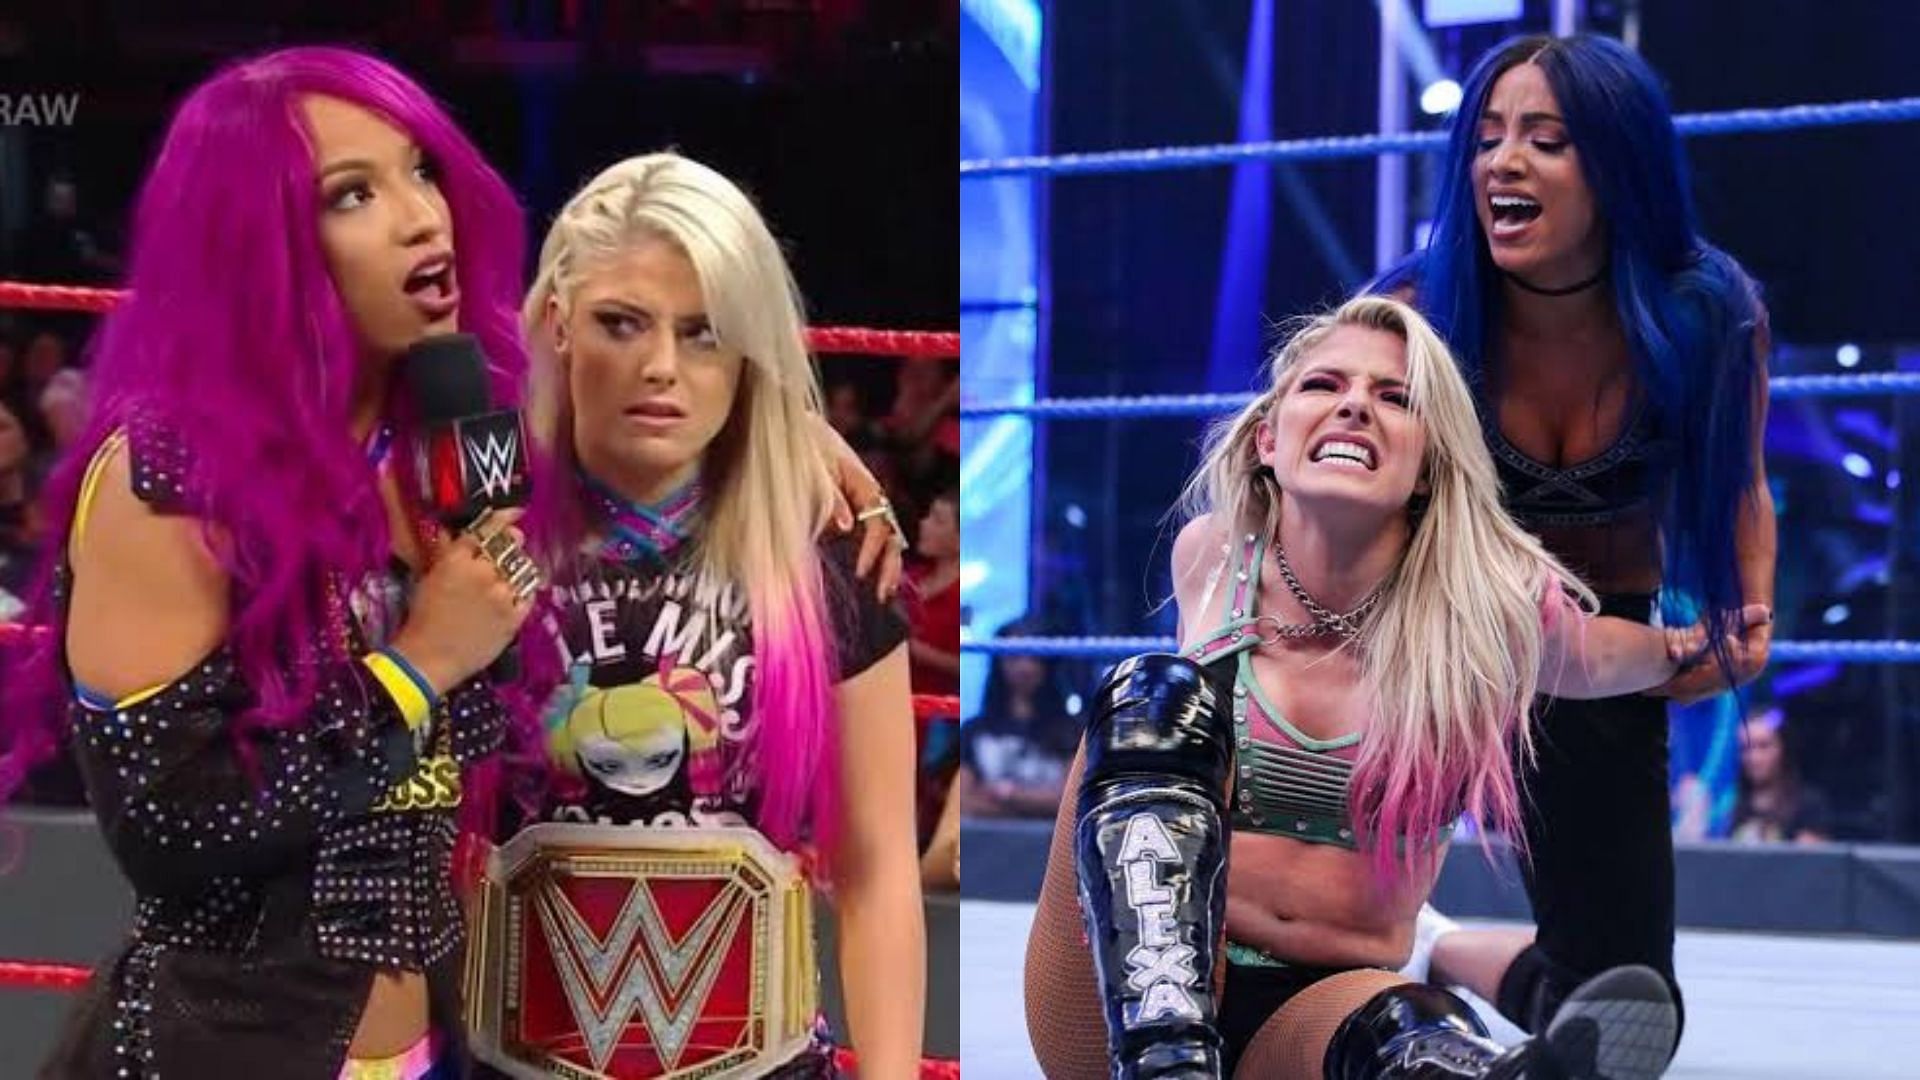 Sasha Banks and Alexa Bliss have faced other before in WWE